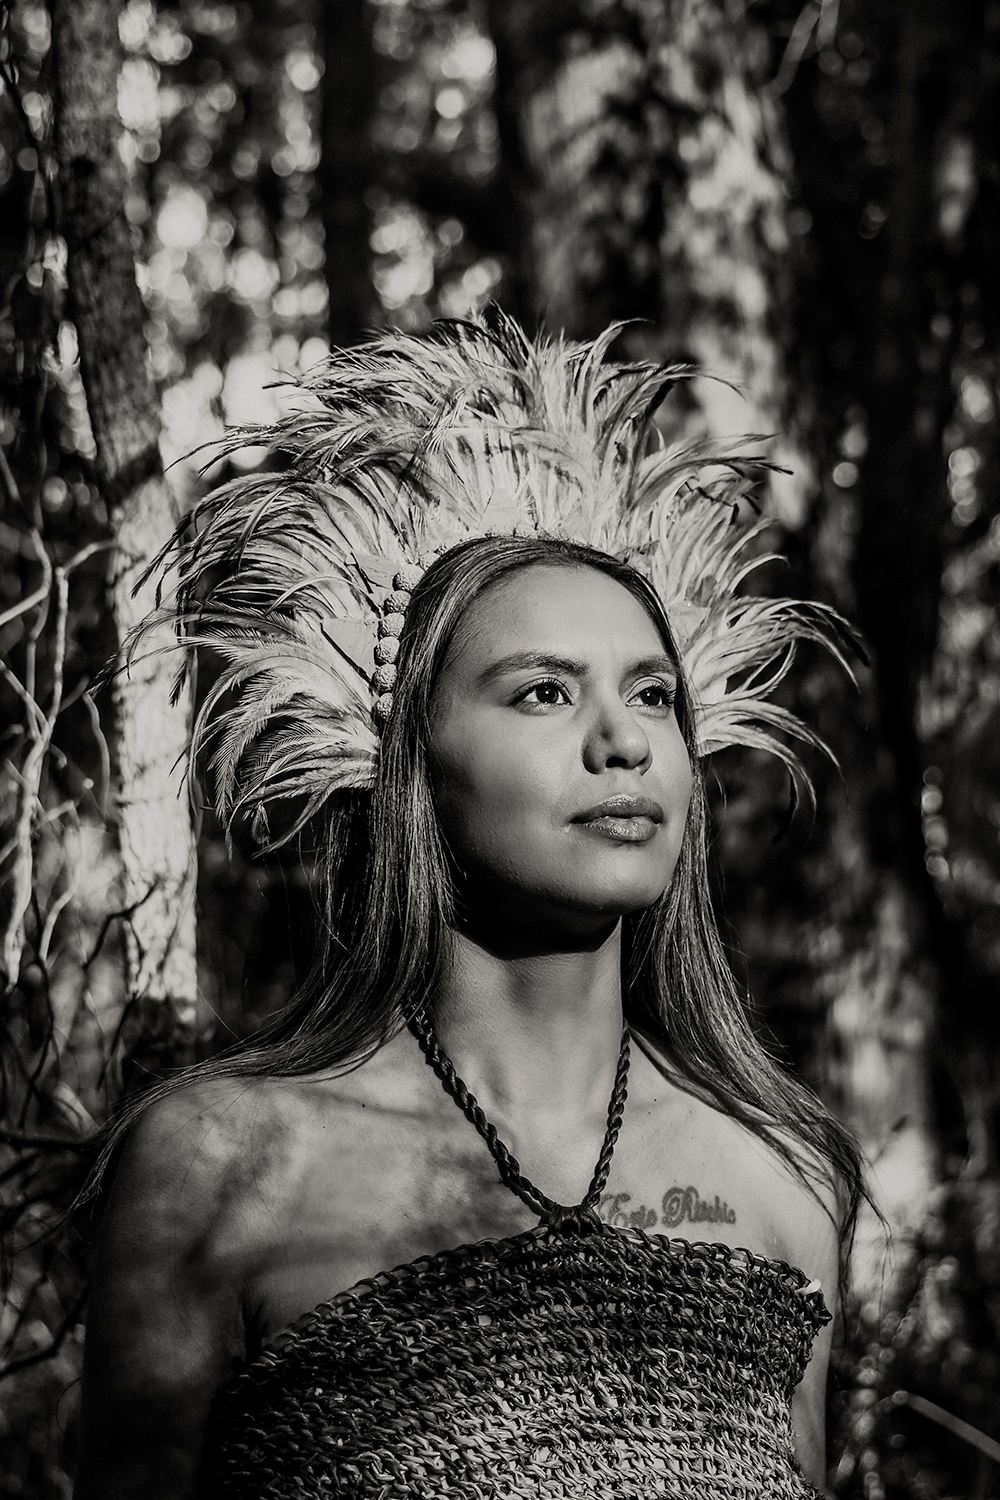  Image of a first nations woman by Marley Morgan Photography